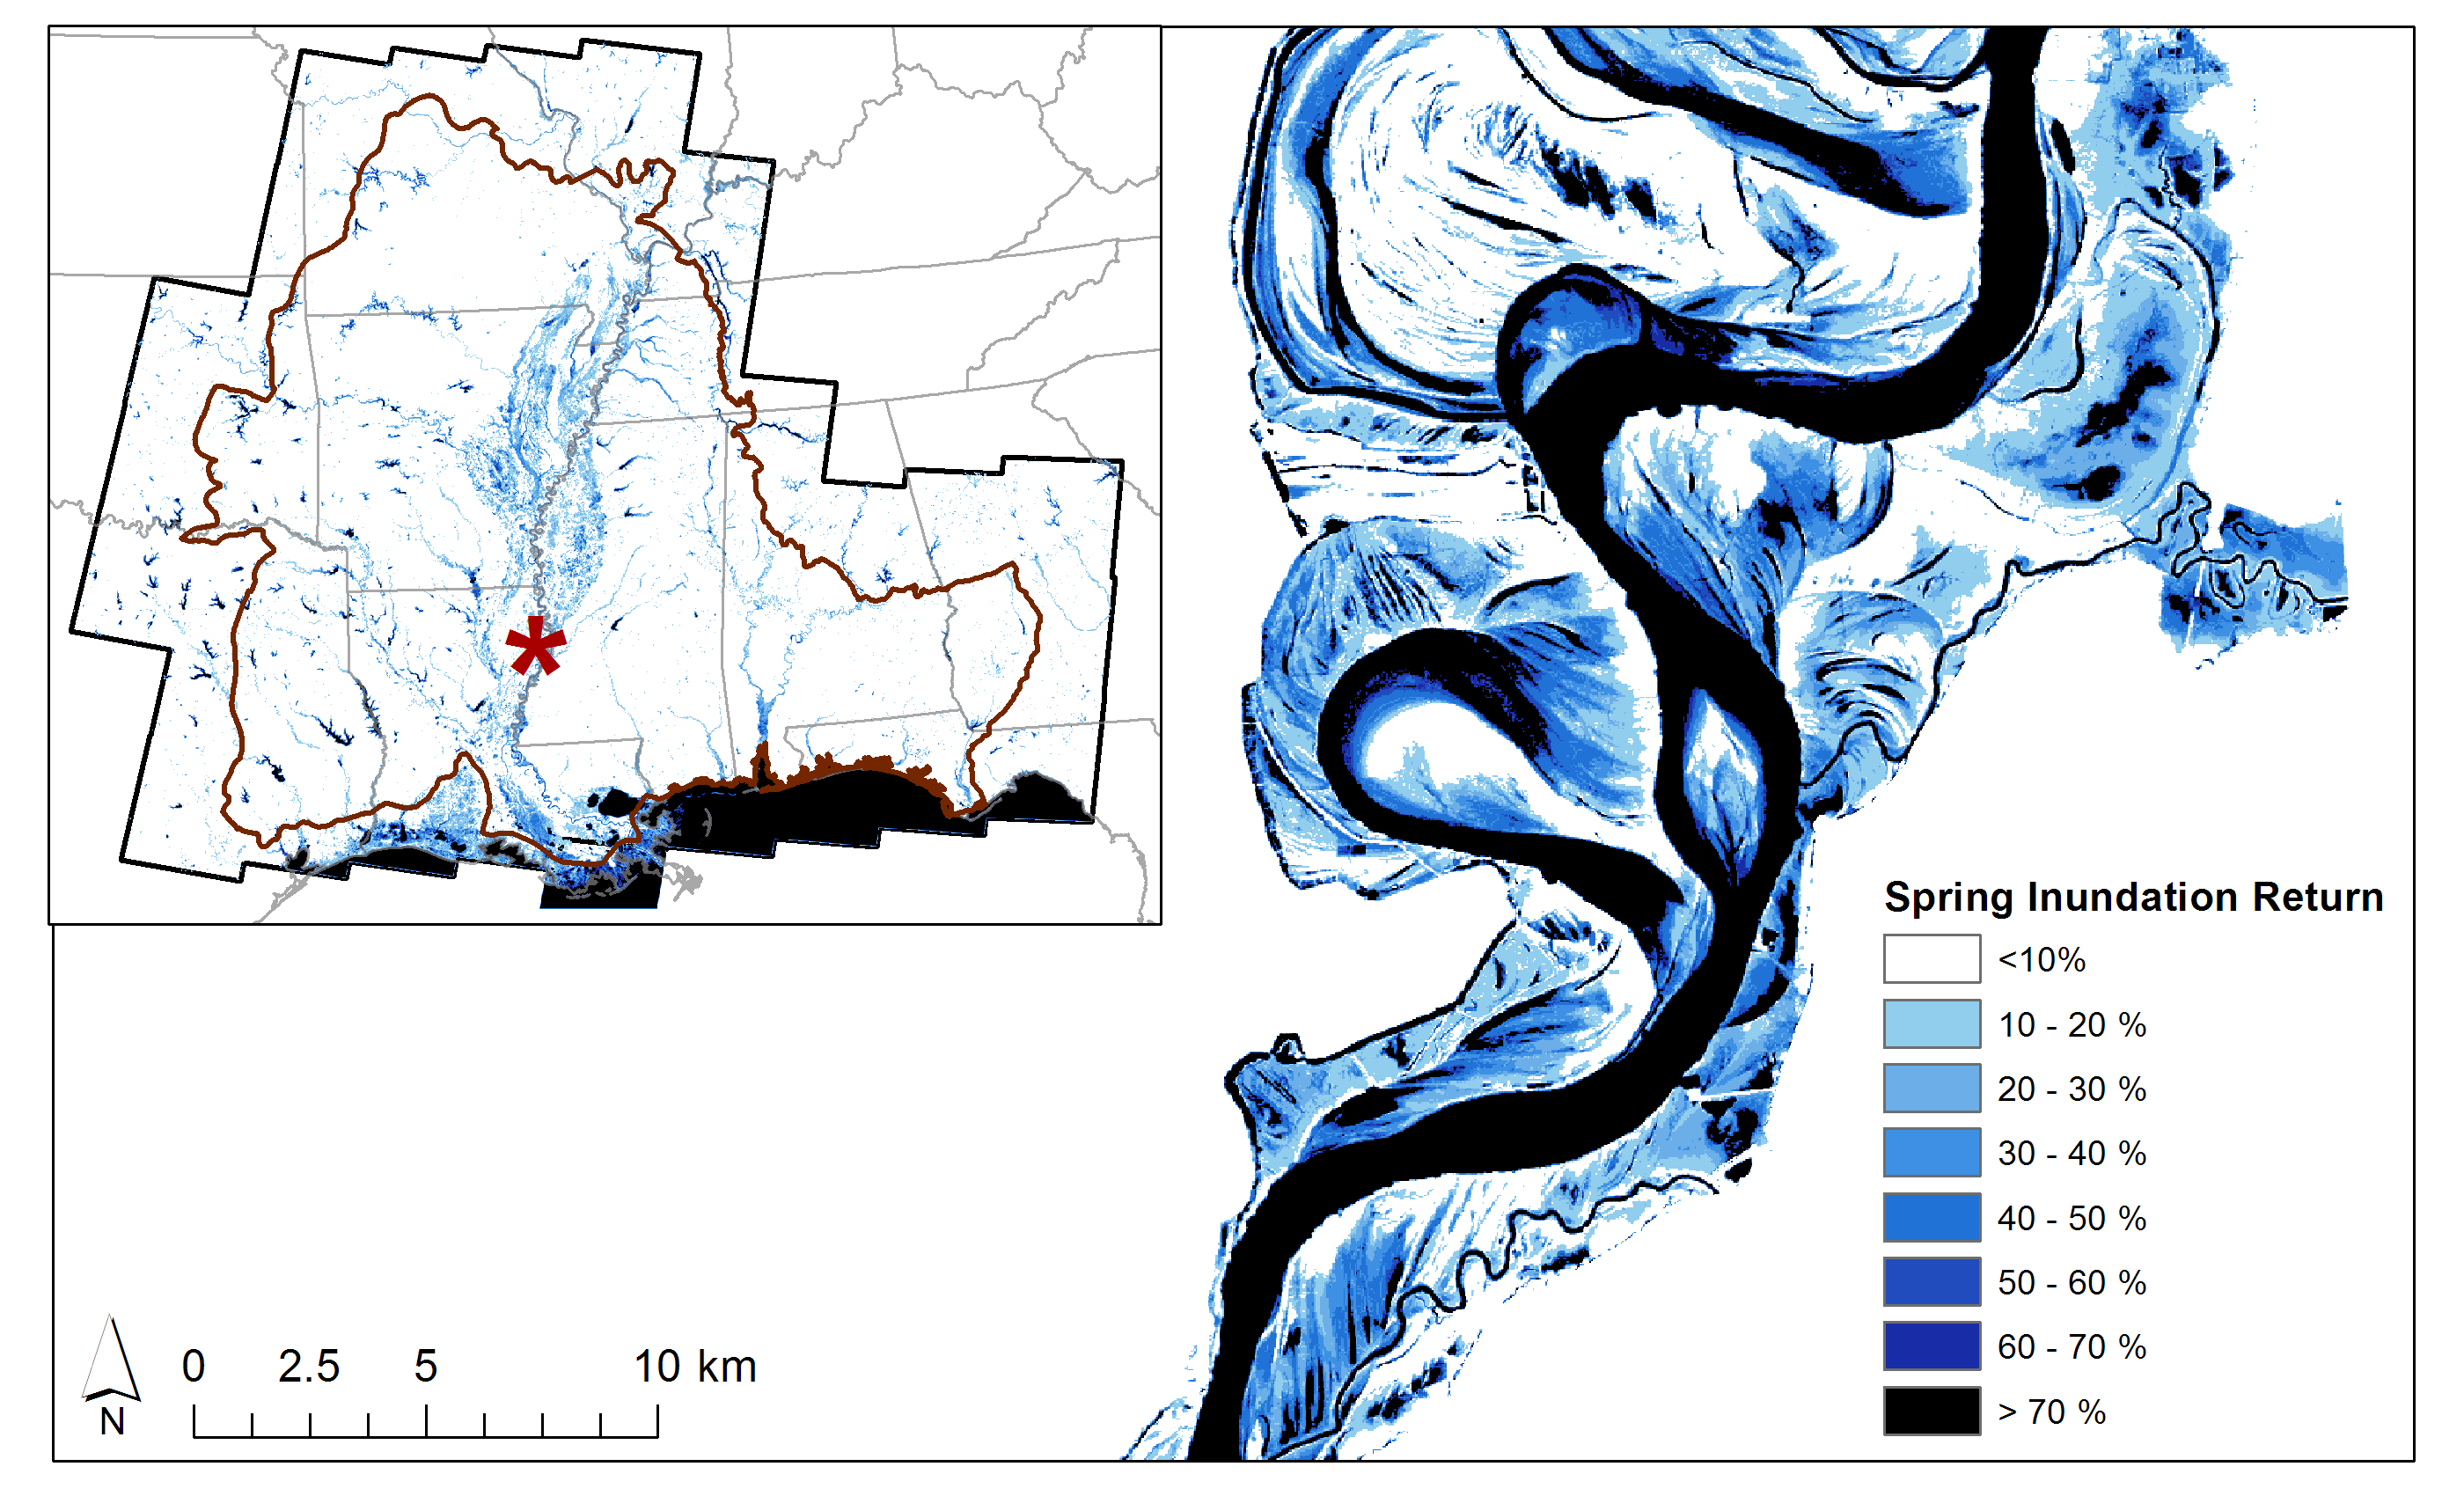 Example of inundation frequency results within a single Landsat scene translated into inundation return frequencies in the spring (April, May, June) based on long-term gaging data from Natchez, Mississippi. Areas outside of the direct influence of the Mississippi River are shaded grey as they are primarily driven by hydrologic conditions from other than the Mississippi River. 